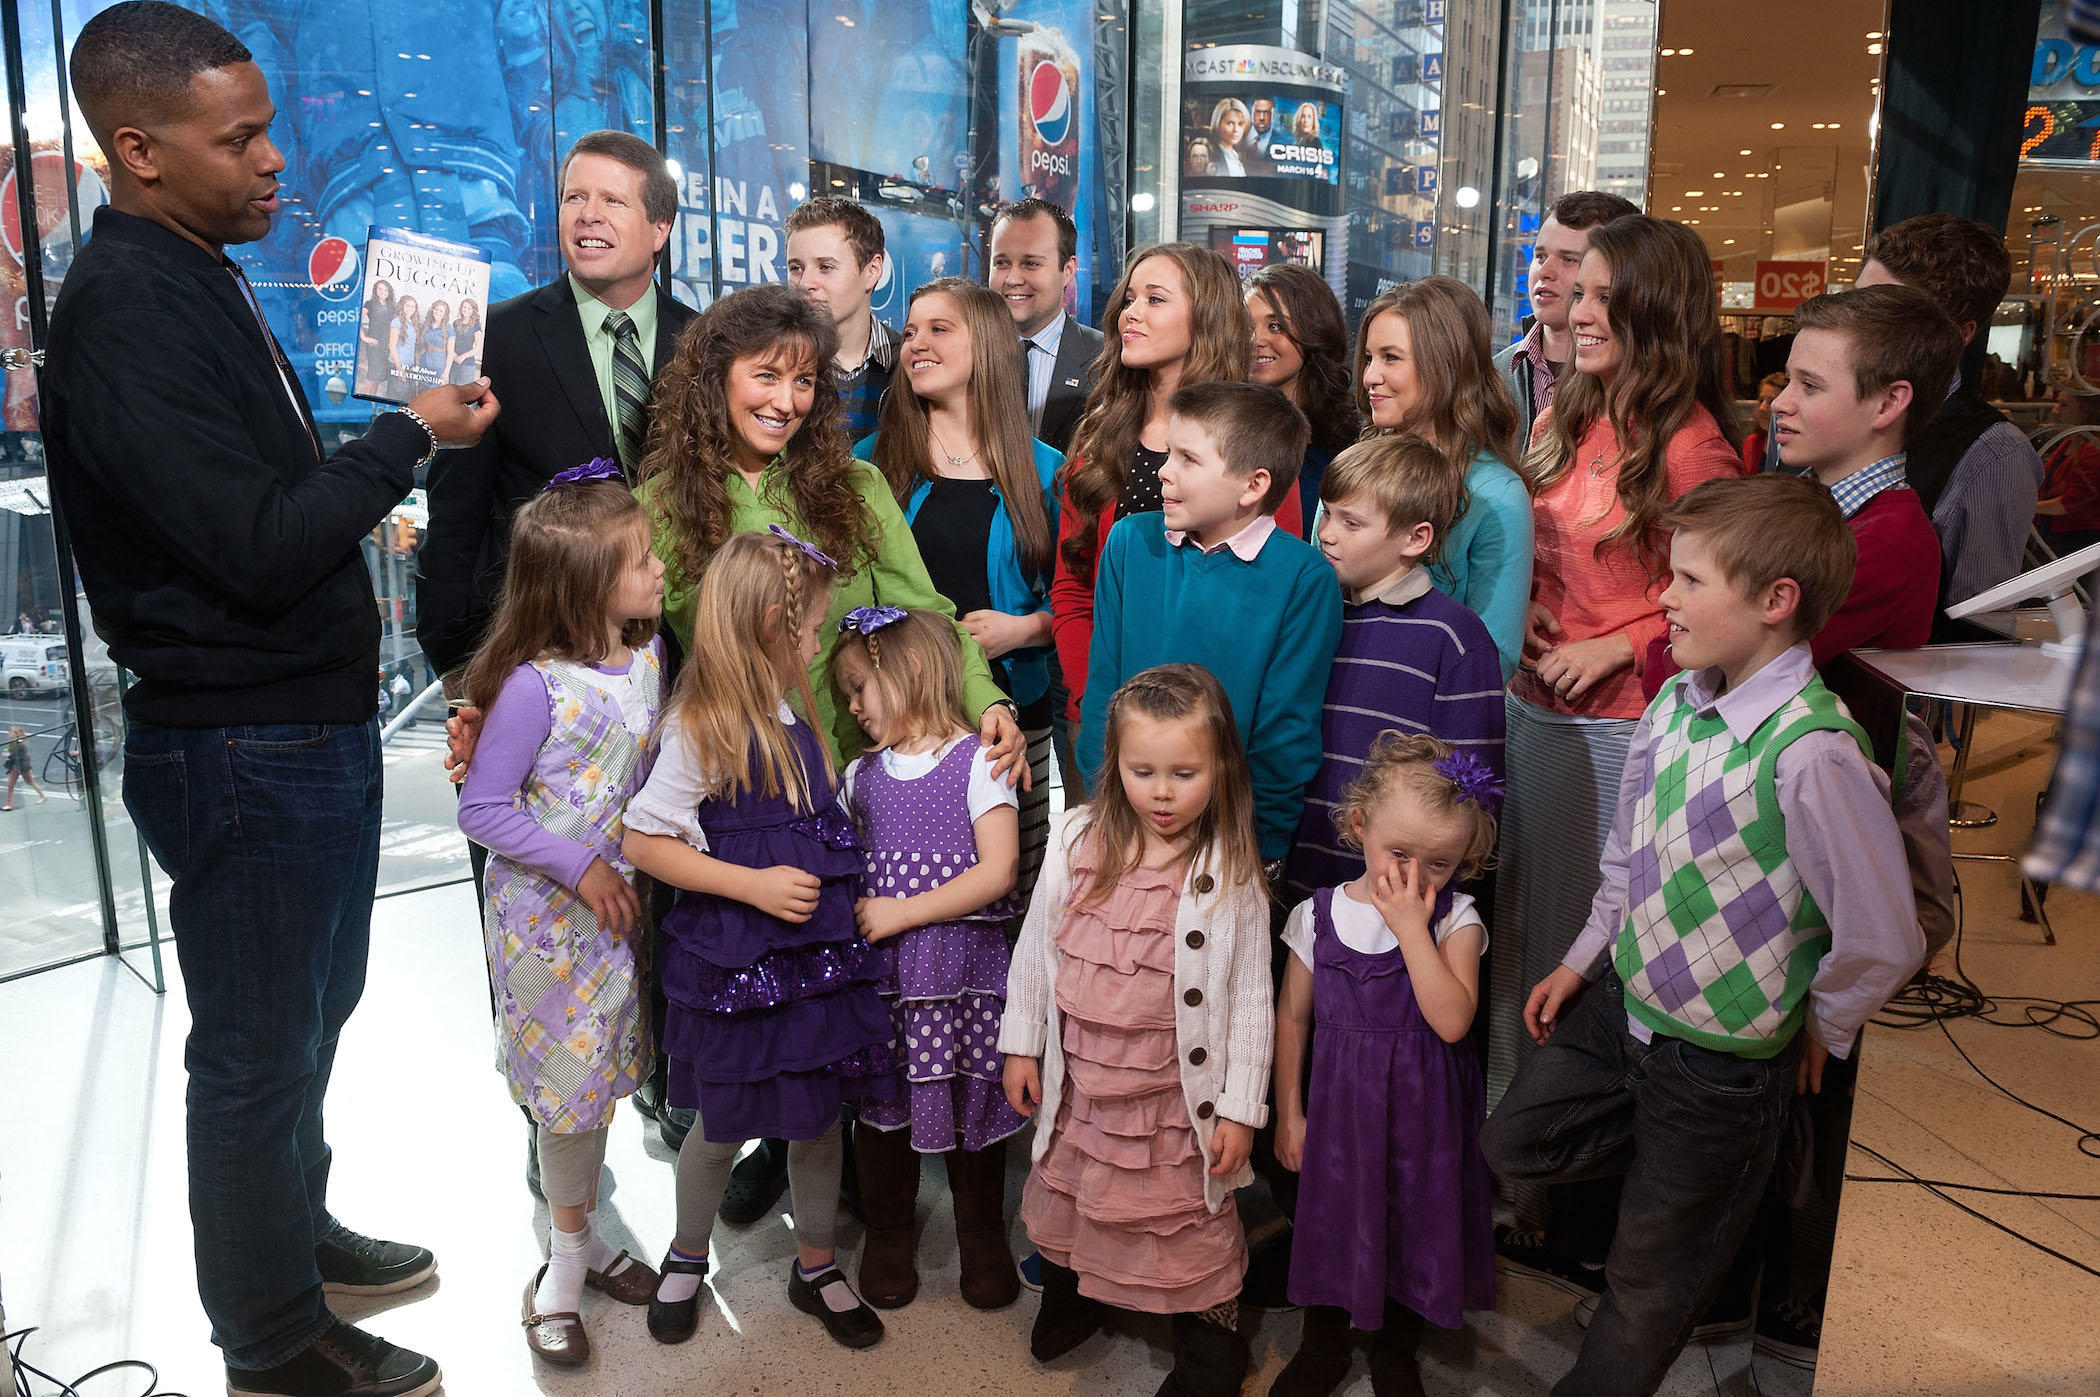 Jim Bob and Michelle Duggar with the rest of the Duggar family talking the latest Duggar news to AJ Calloway during their visit to 'Extra'